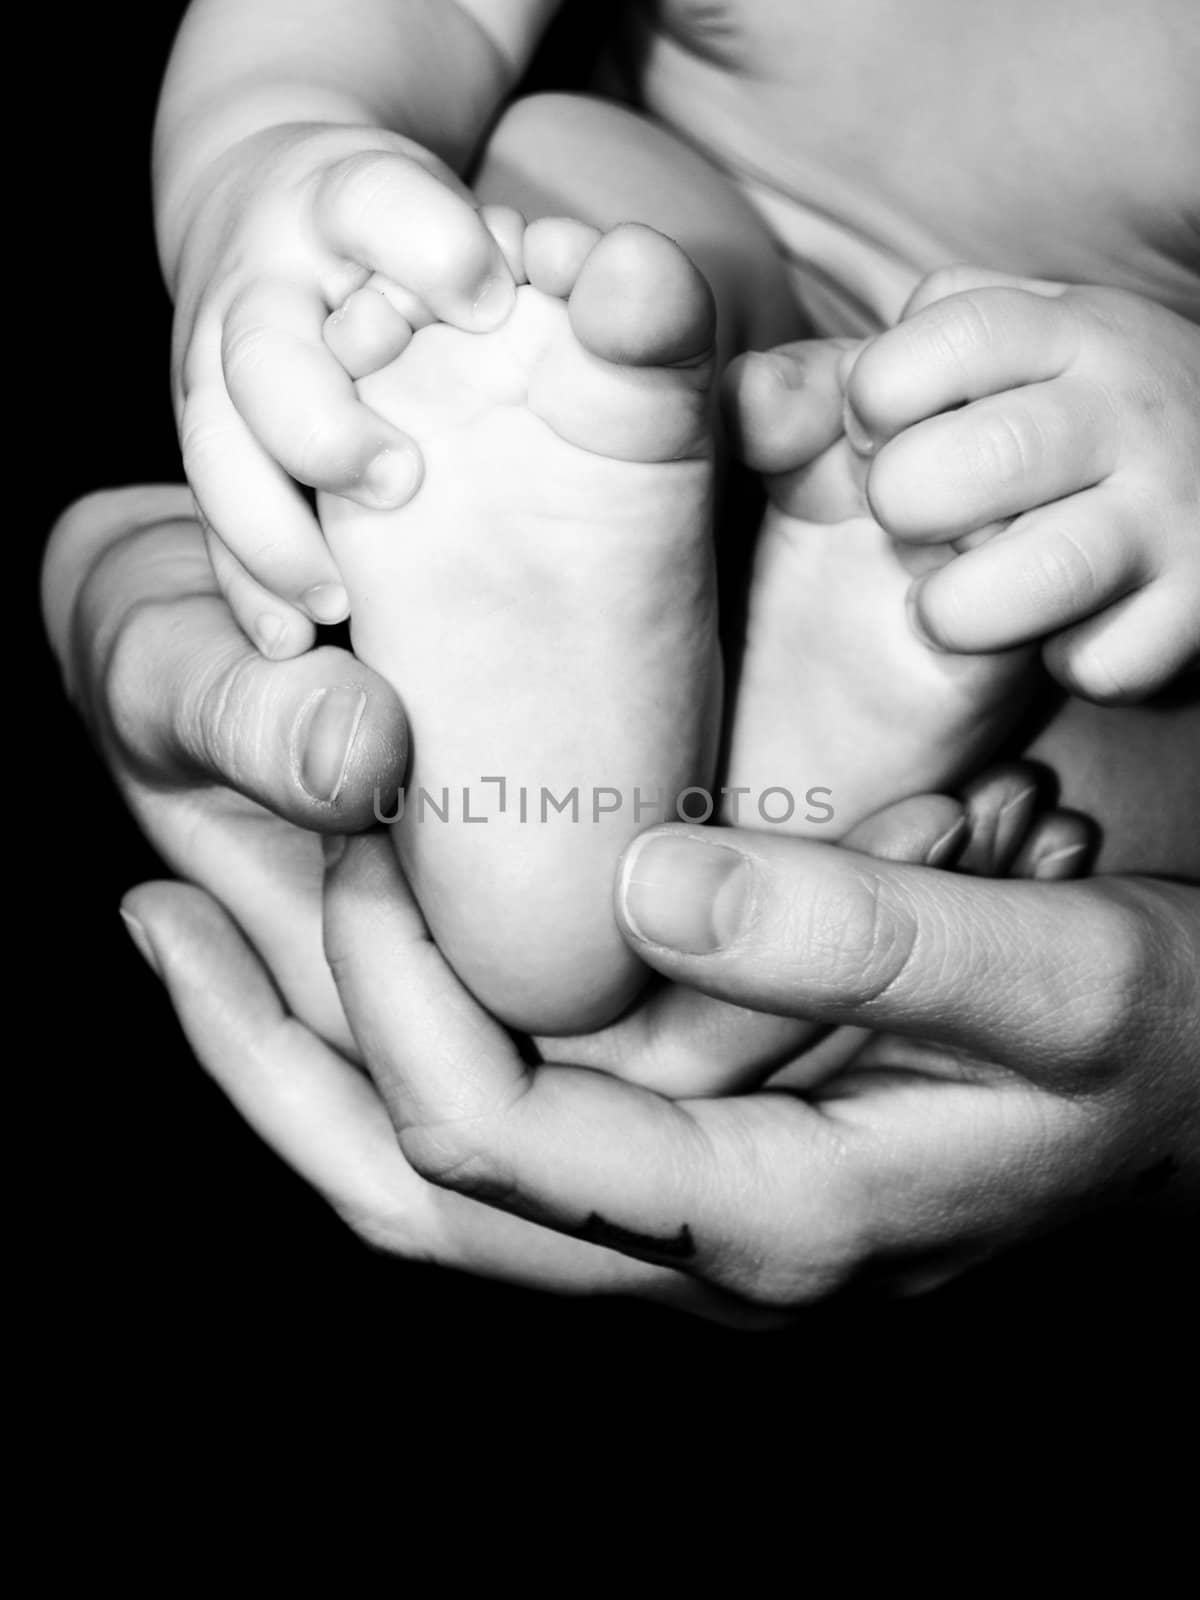 Baby feet and mother's hands by chaosmediamgt